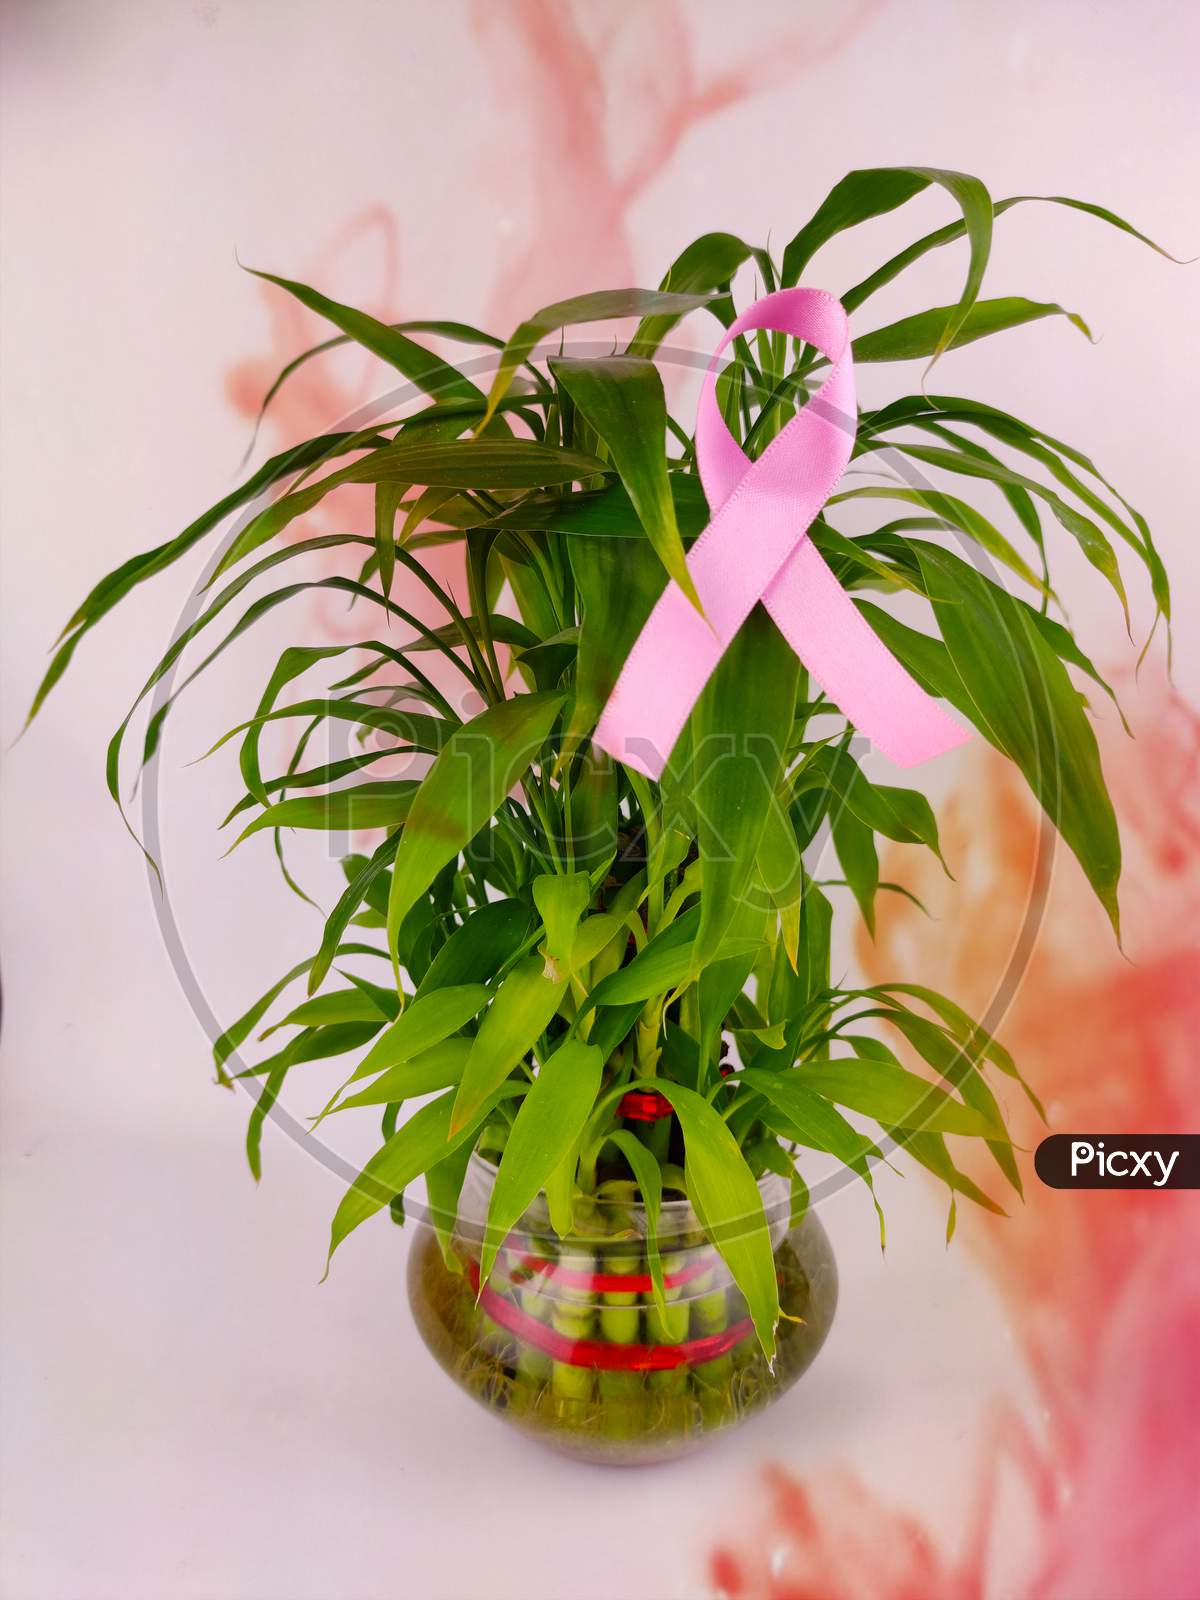 Breast cancer awareness symbol pink ribbon on lucky bamboo plant